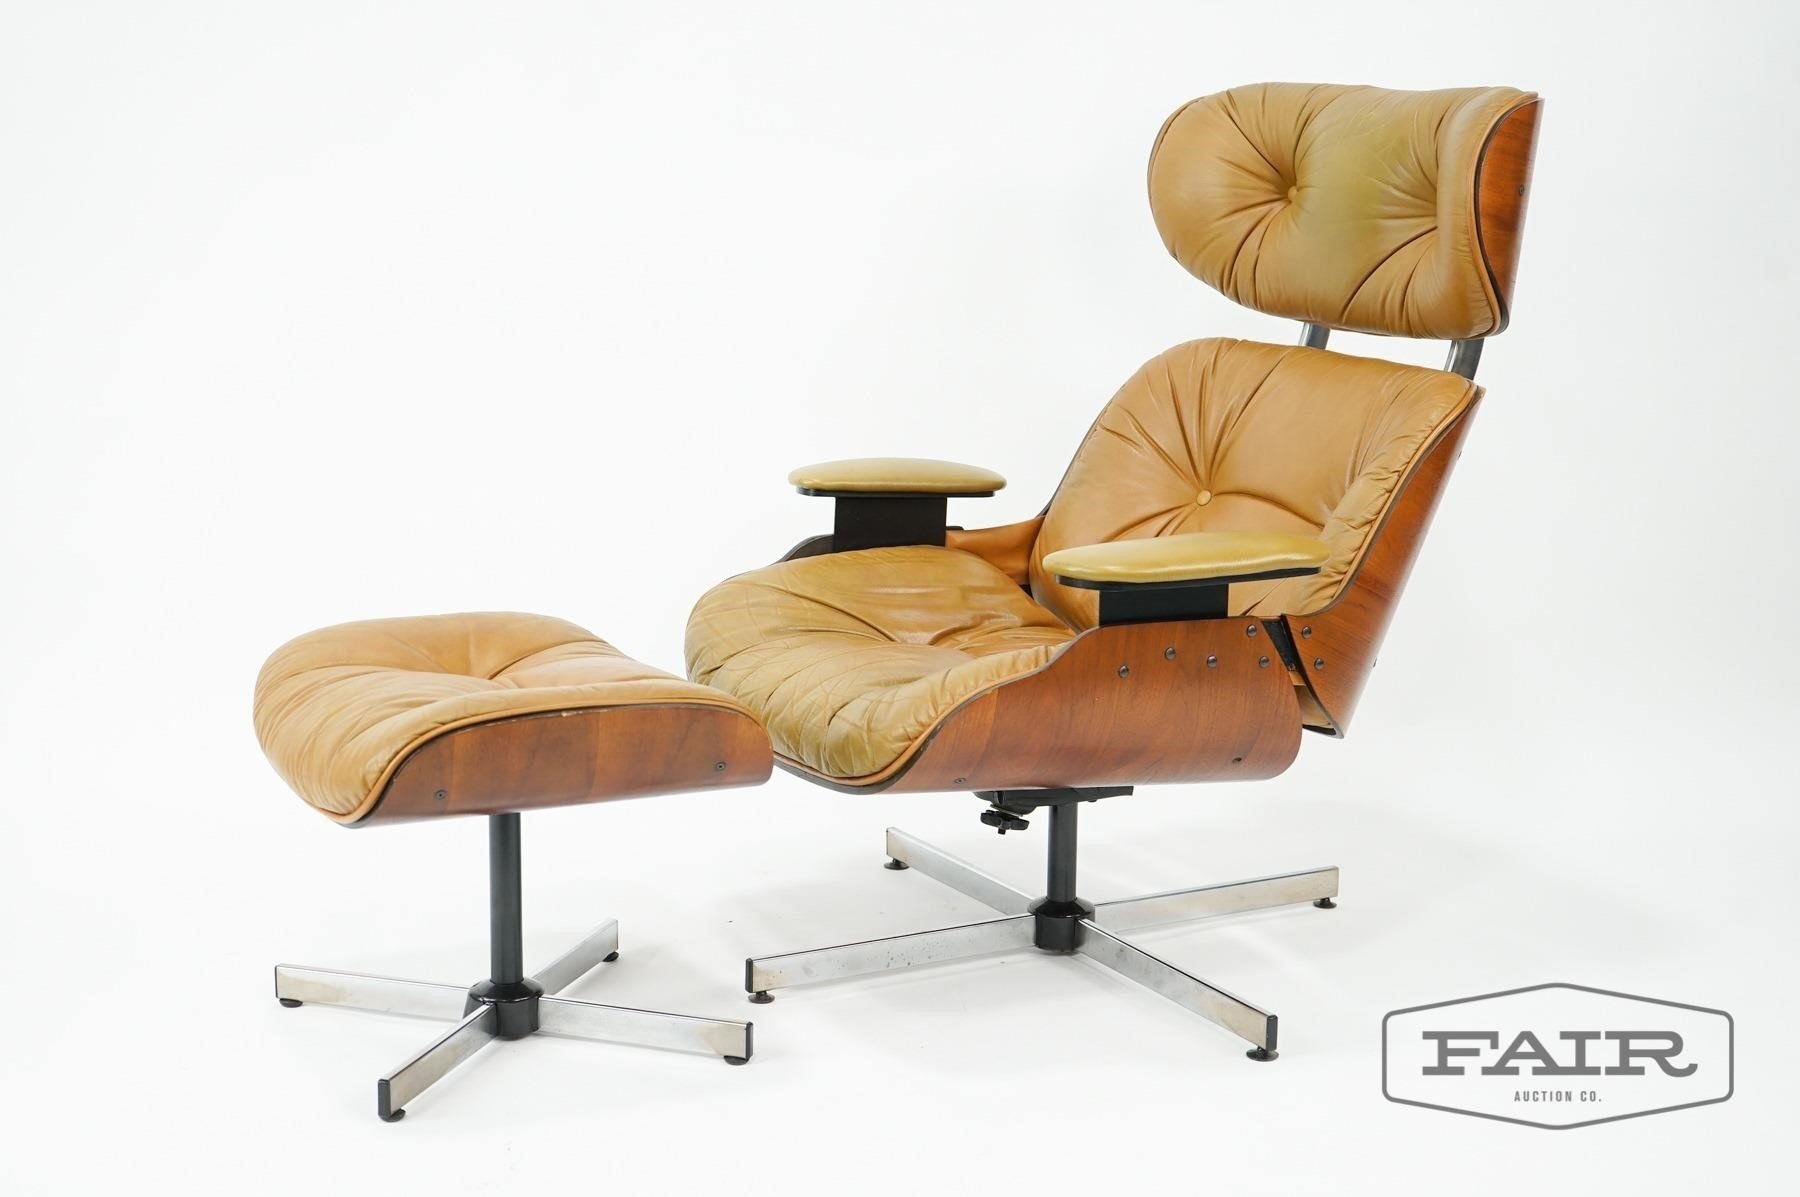 Frank Doerner Eames Style Lounge Chair And Ottoman Fair Auction Company Llc